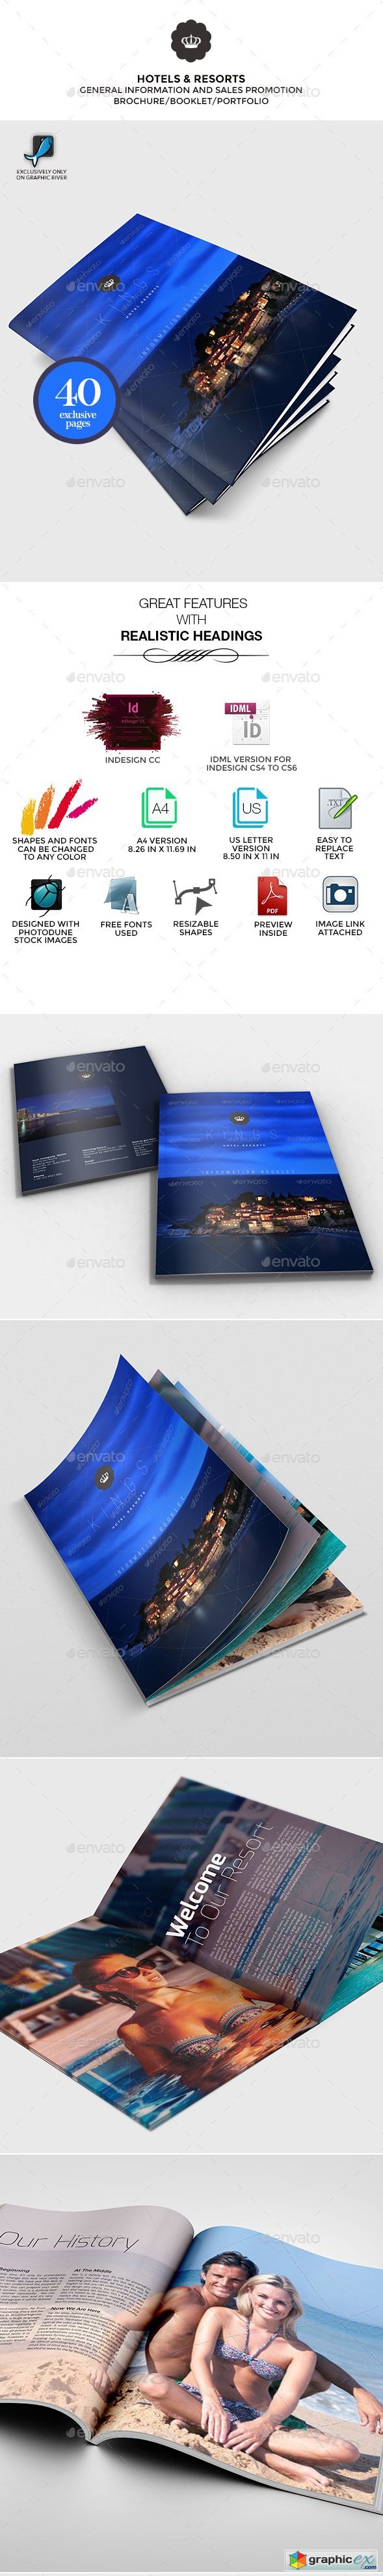 Hotels and Resorts General Information Brochure